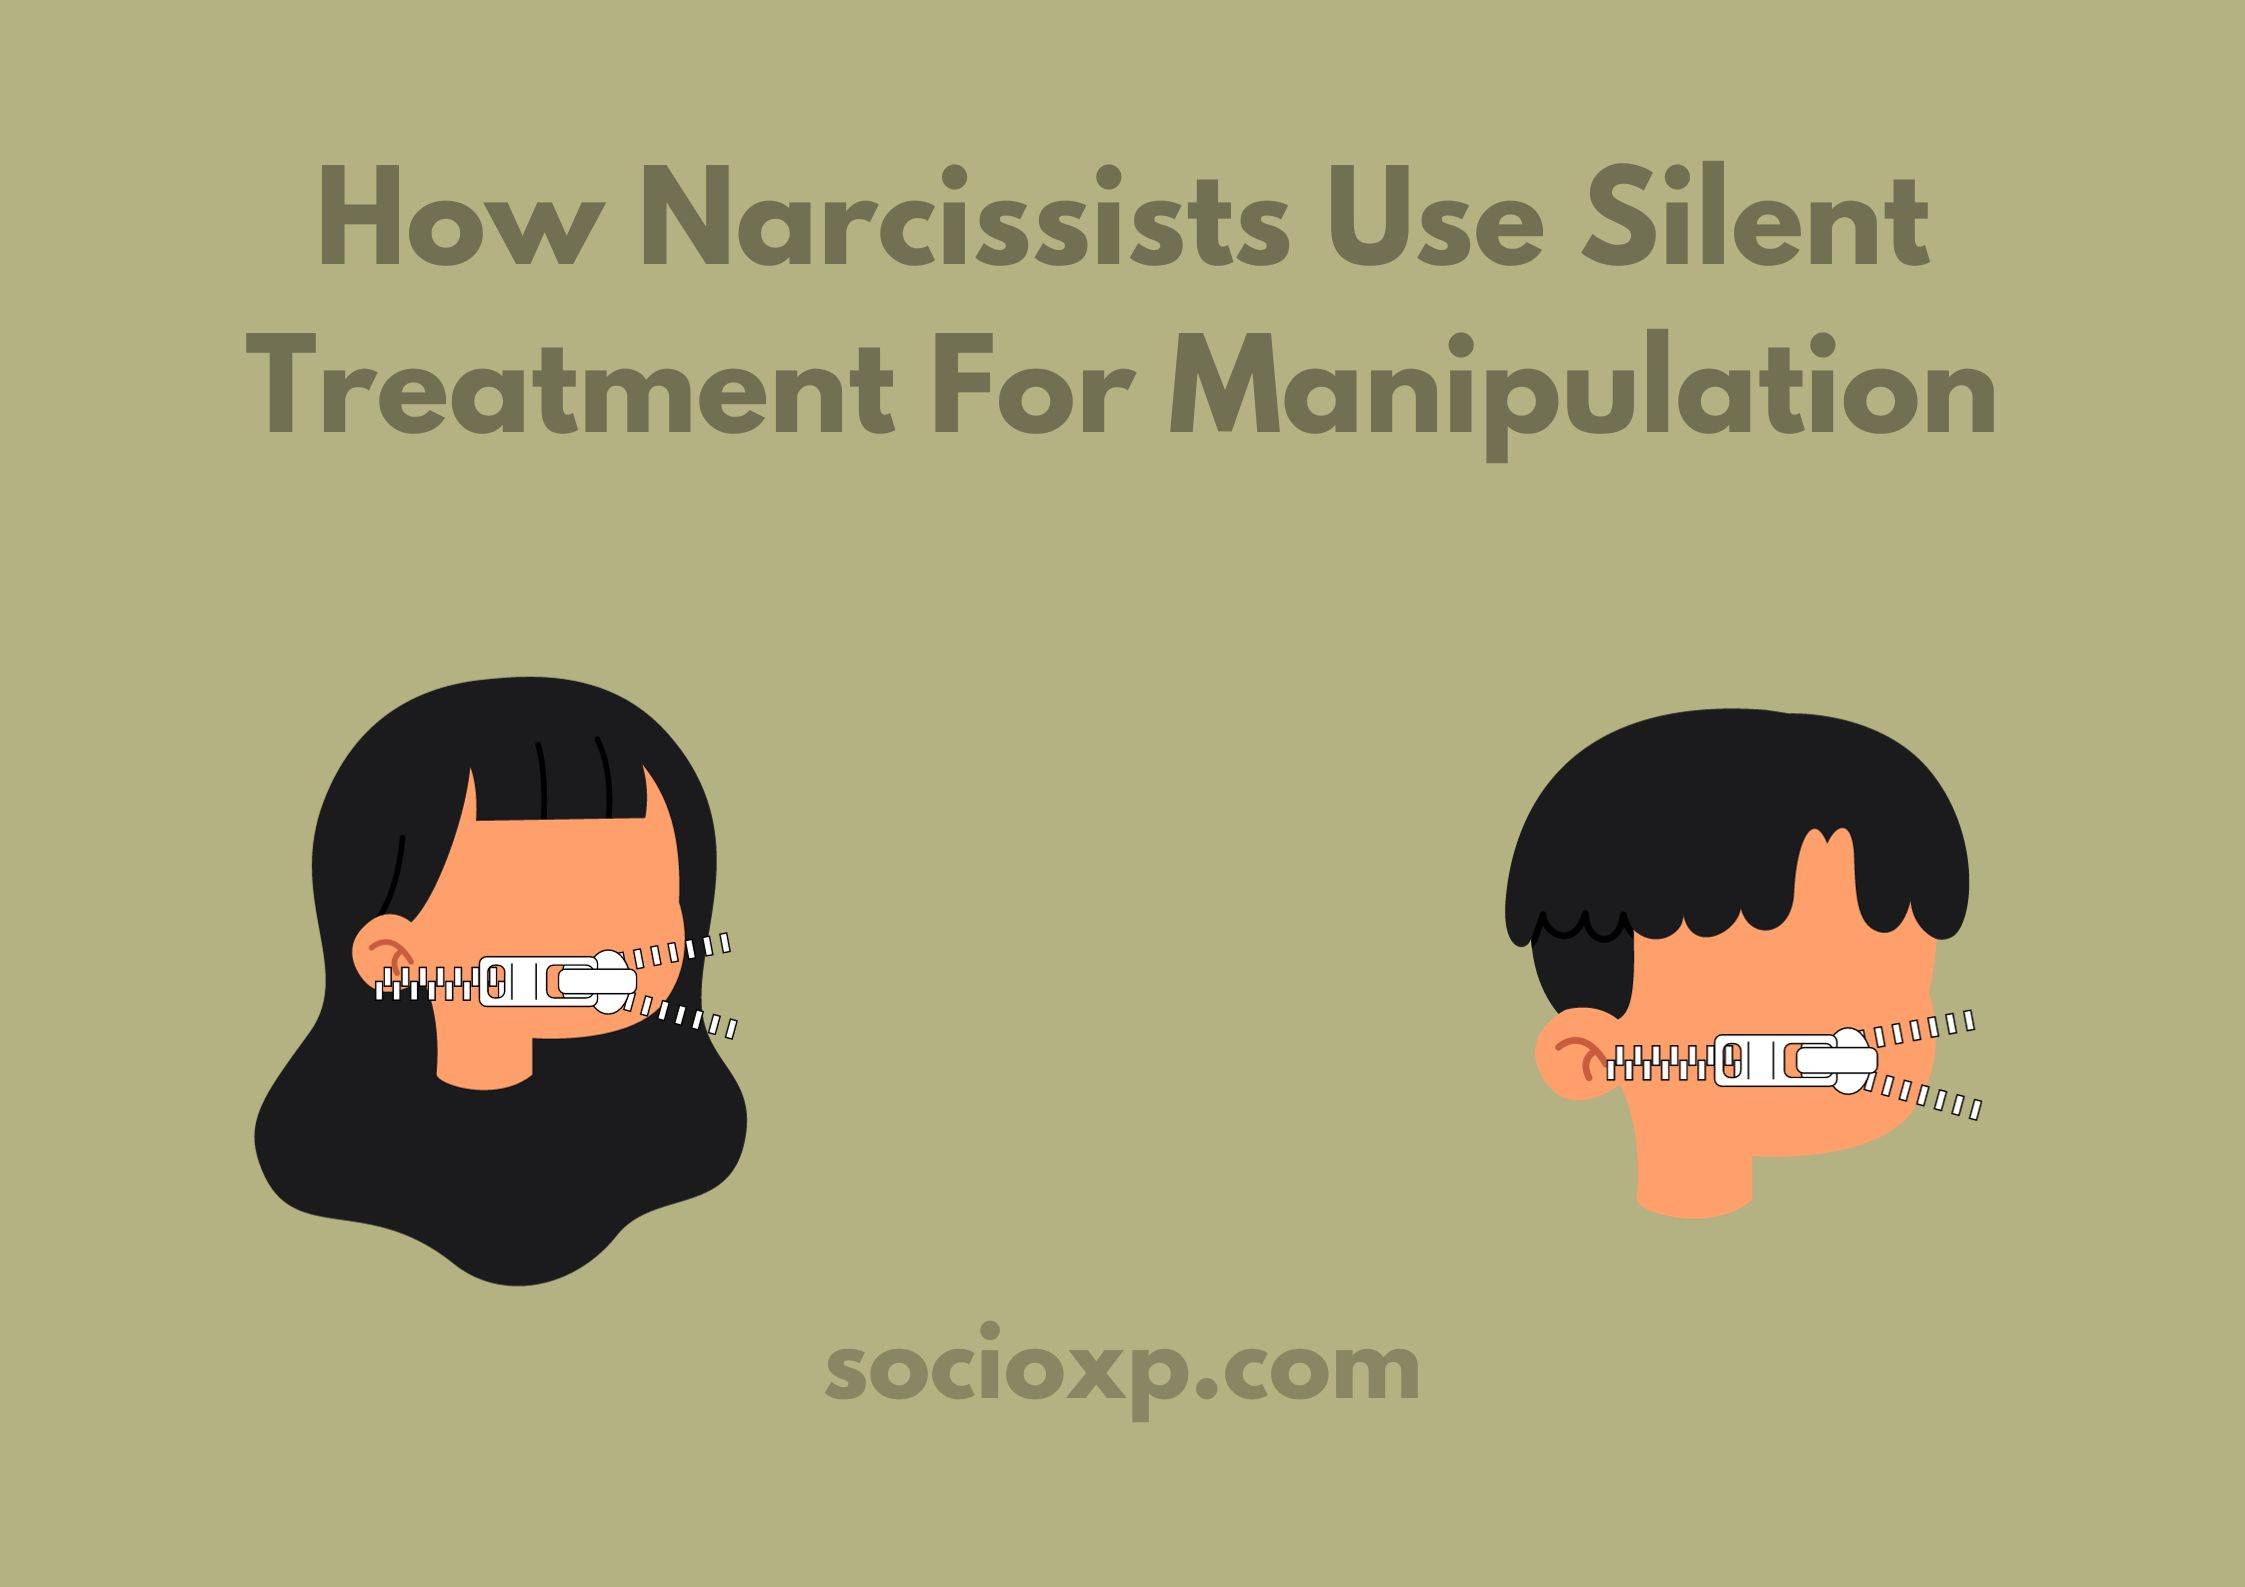 How Narcissists Use Silent Treatment For Manipulation